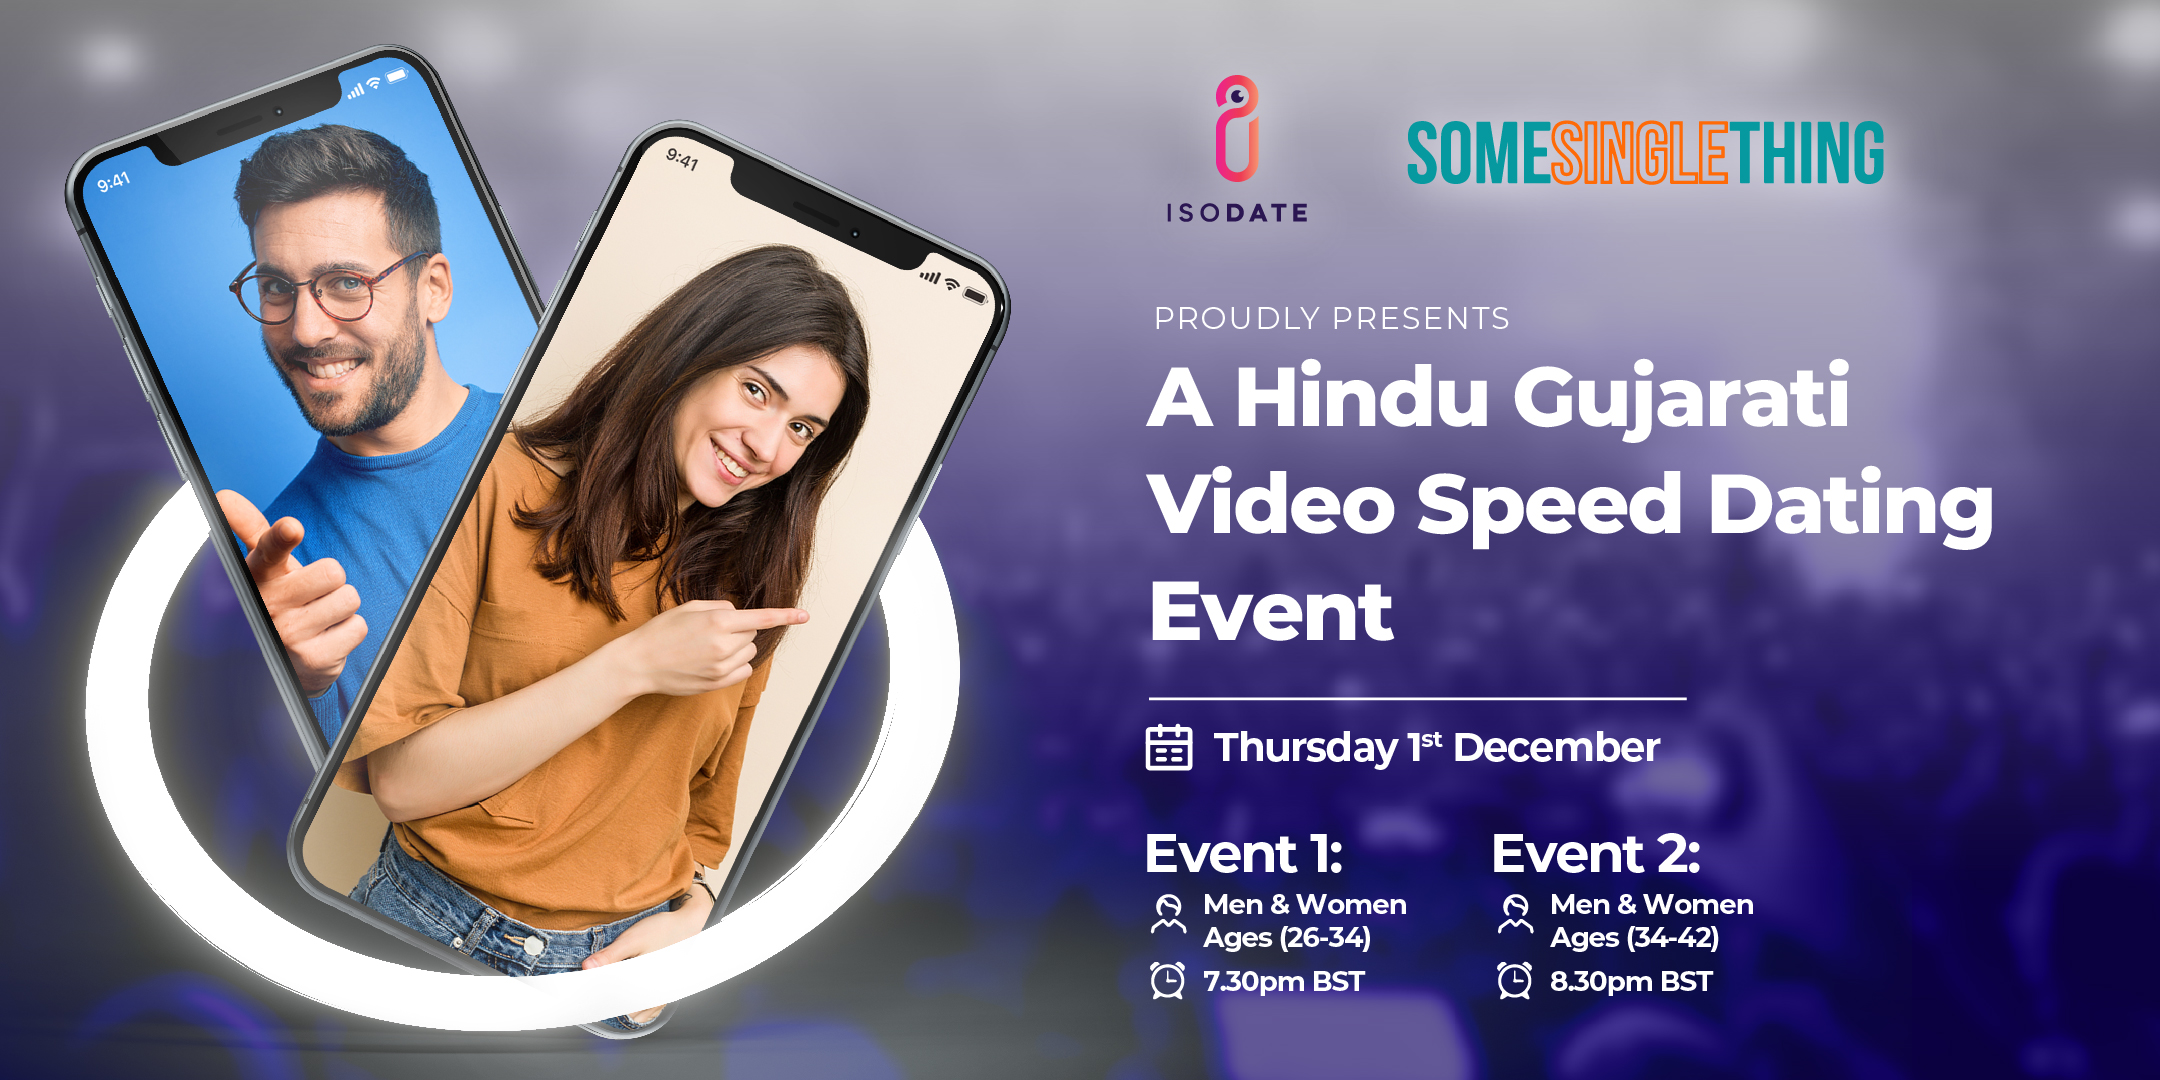 Video Speed Dating for Hindu Singles